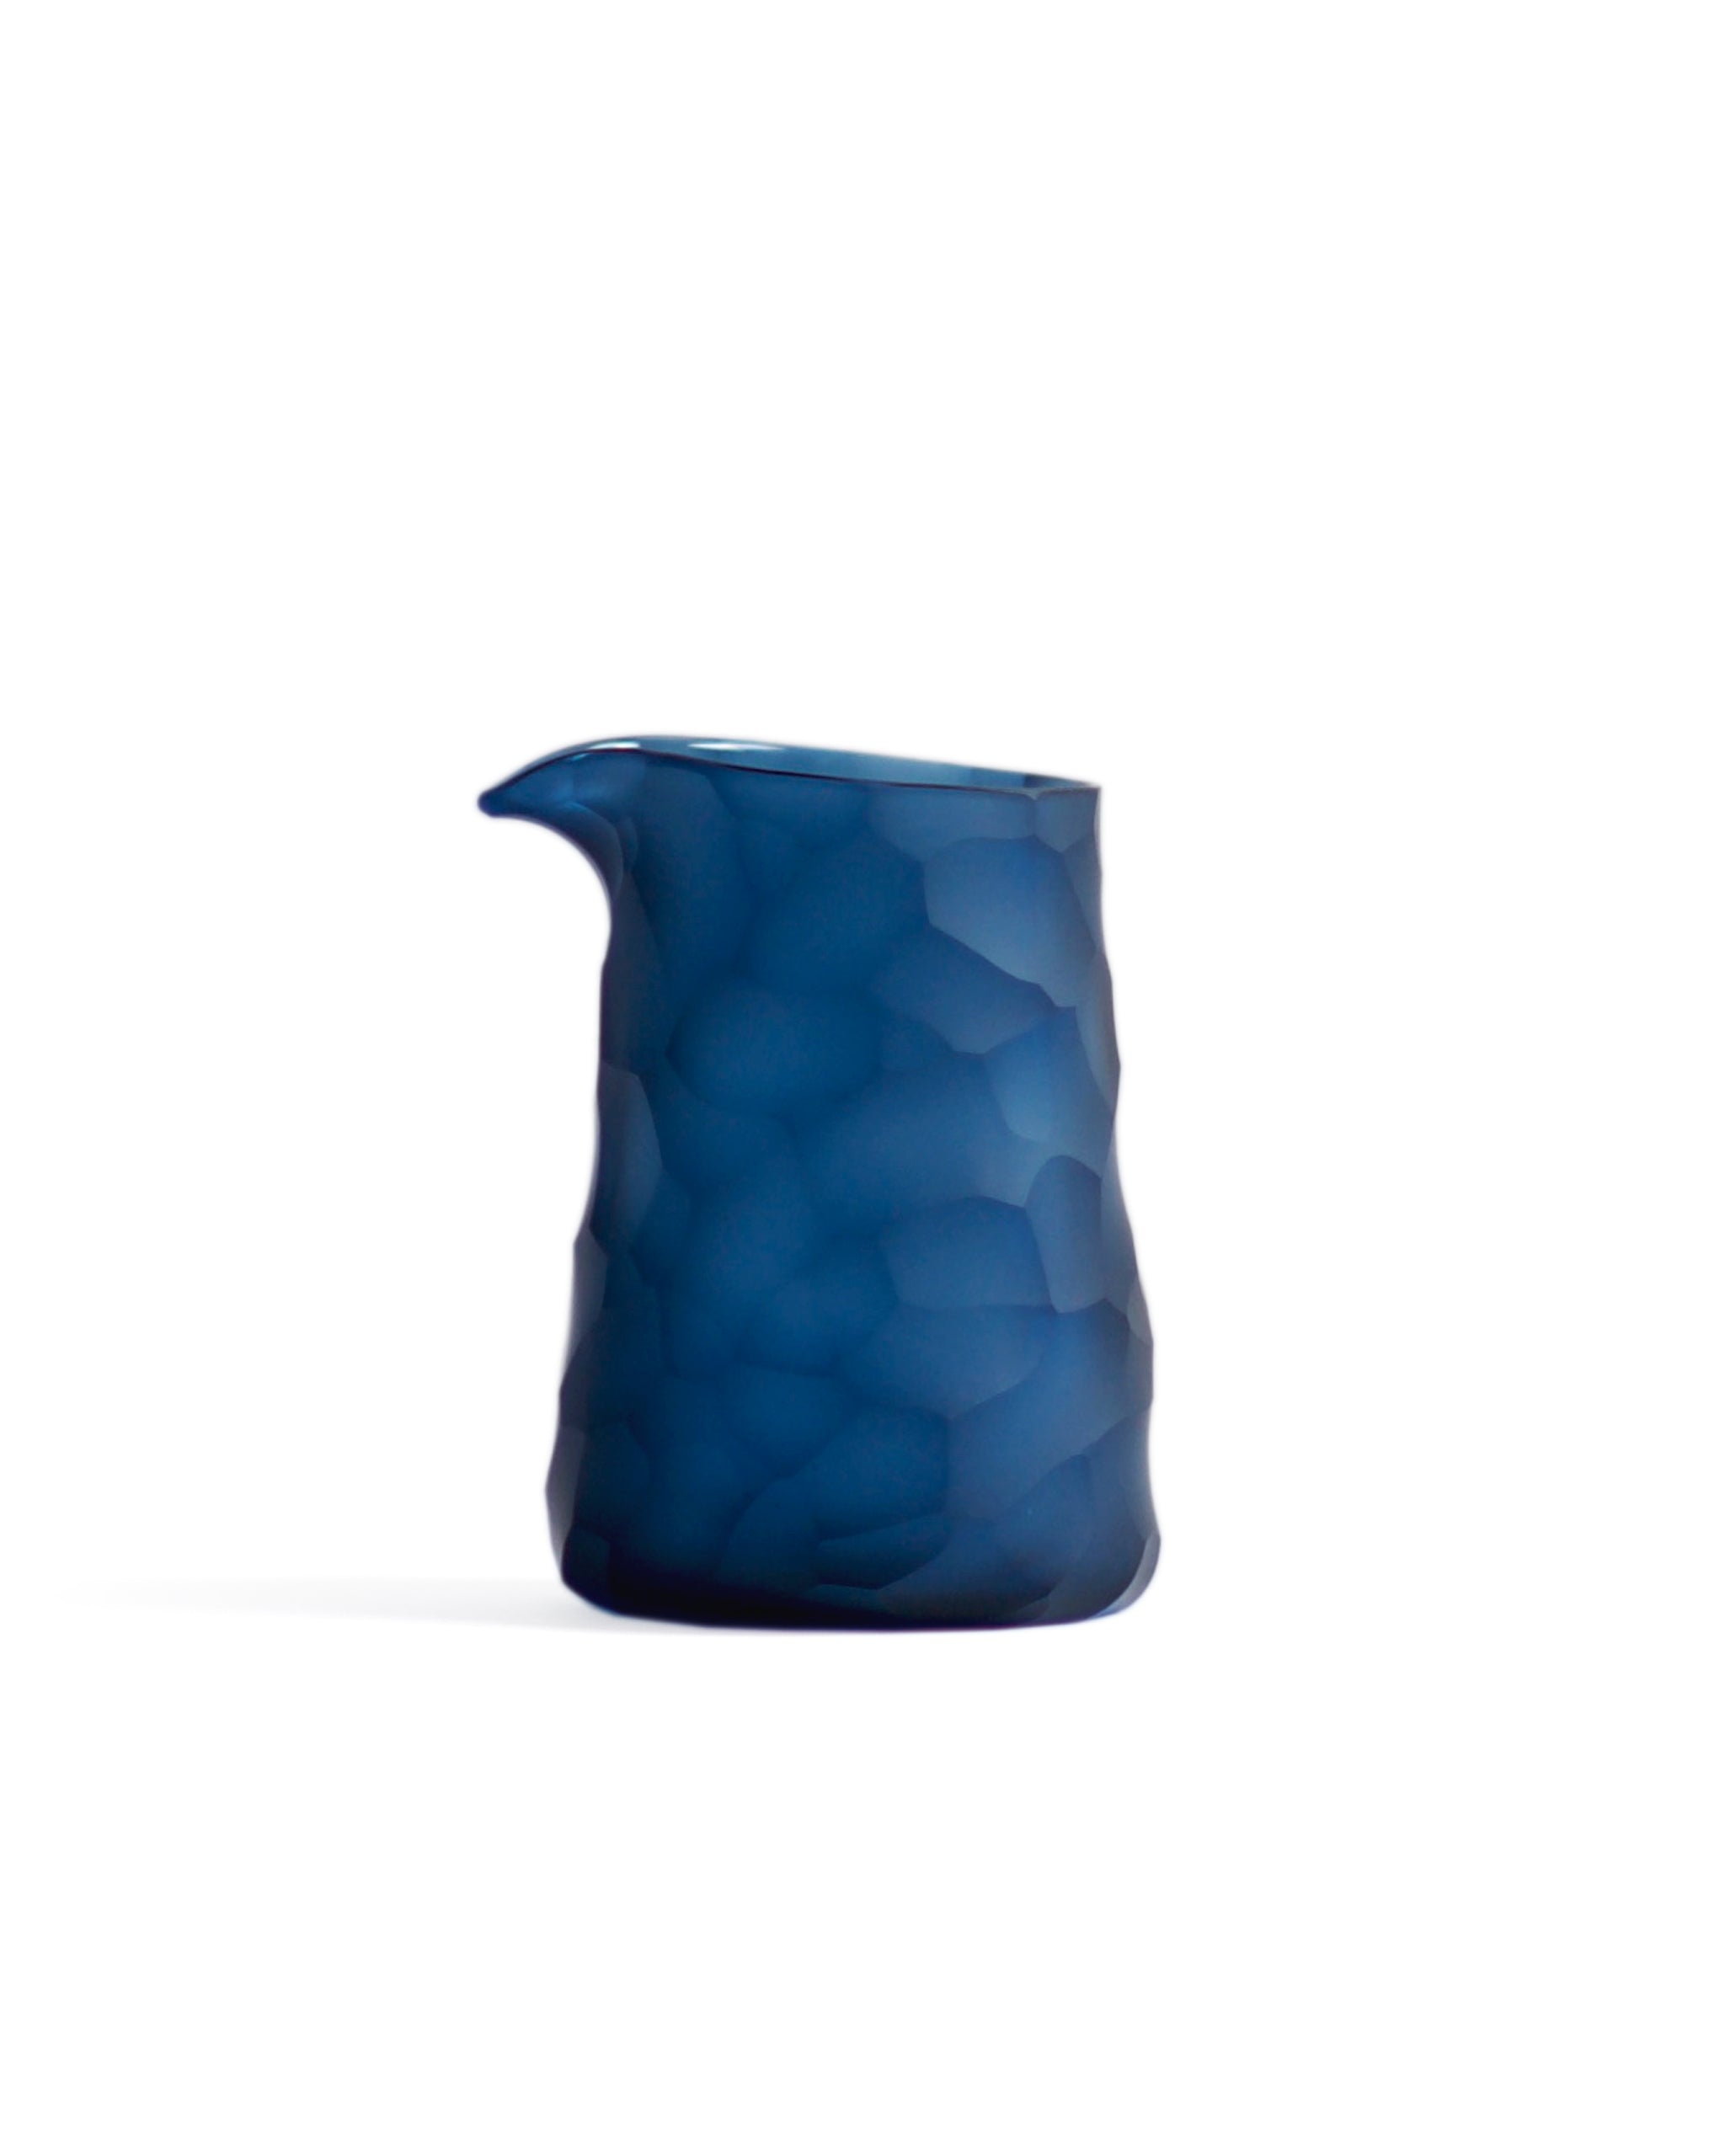 Silhouetted dark blue reclaimed blue one lipped pitcher in rock pattern against white background.